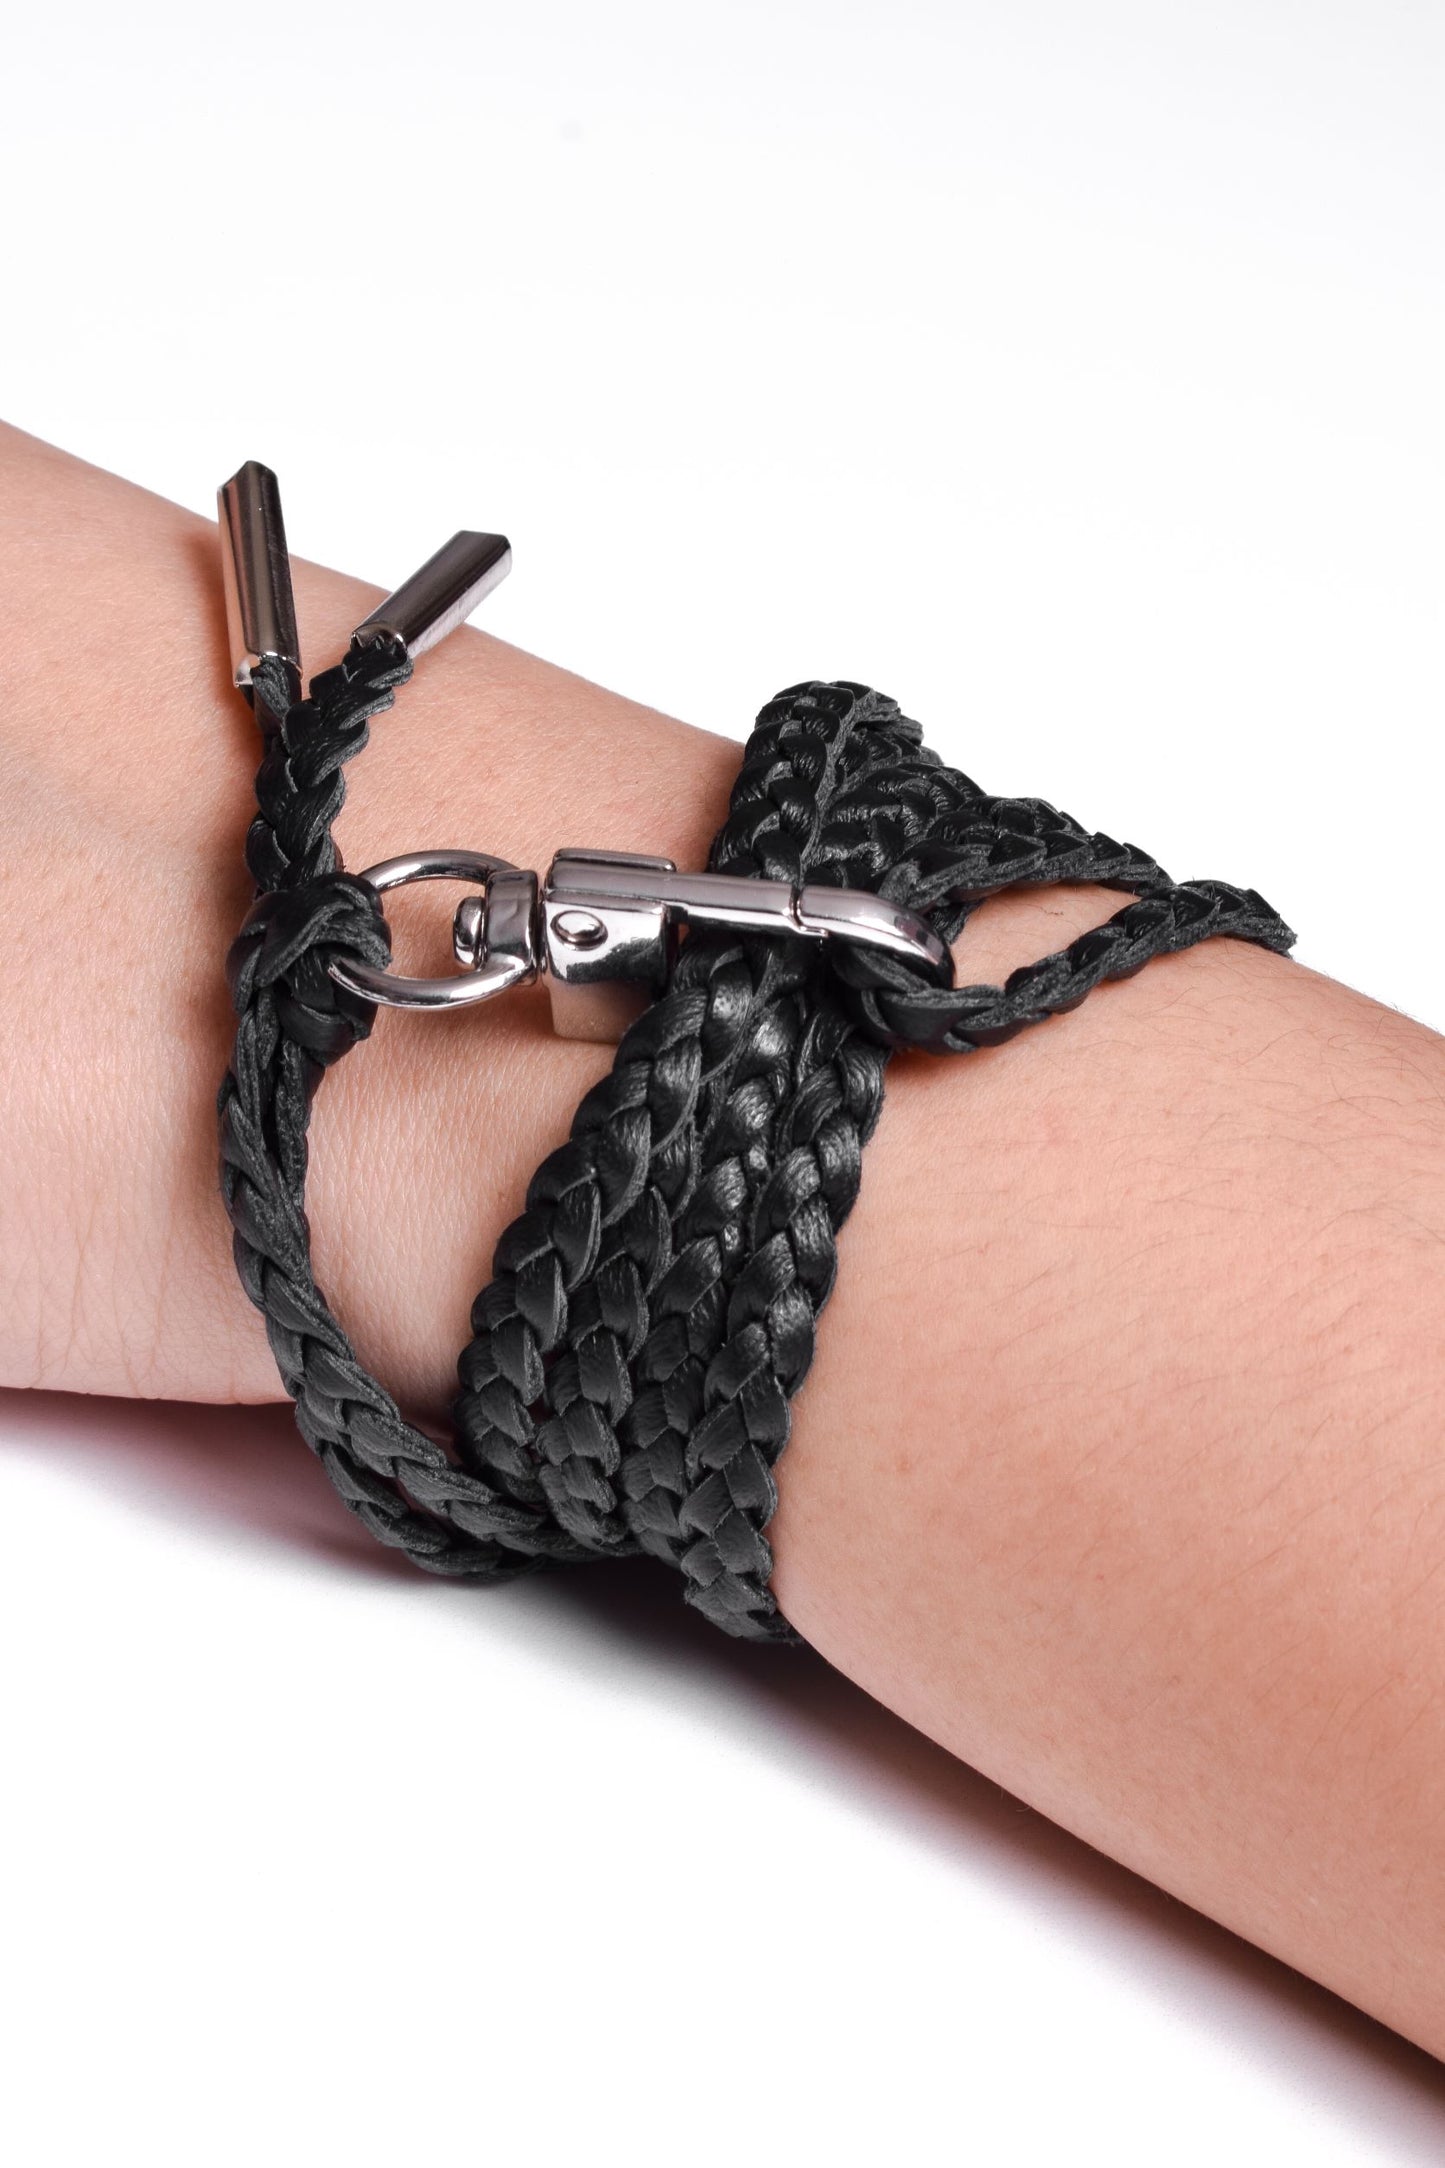 Genuine Leather Bracelet/Crossbody/Necklace with 3 hand-braided double strands, Brown, or Black. 1 Swivel Carabiner and 2 Silver-plated Terminals.- P38